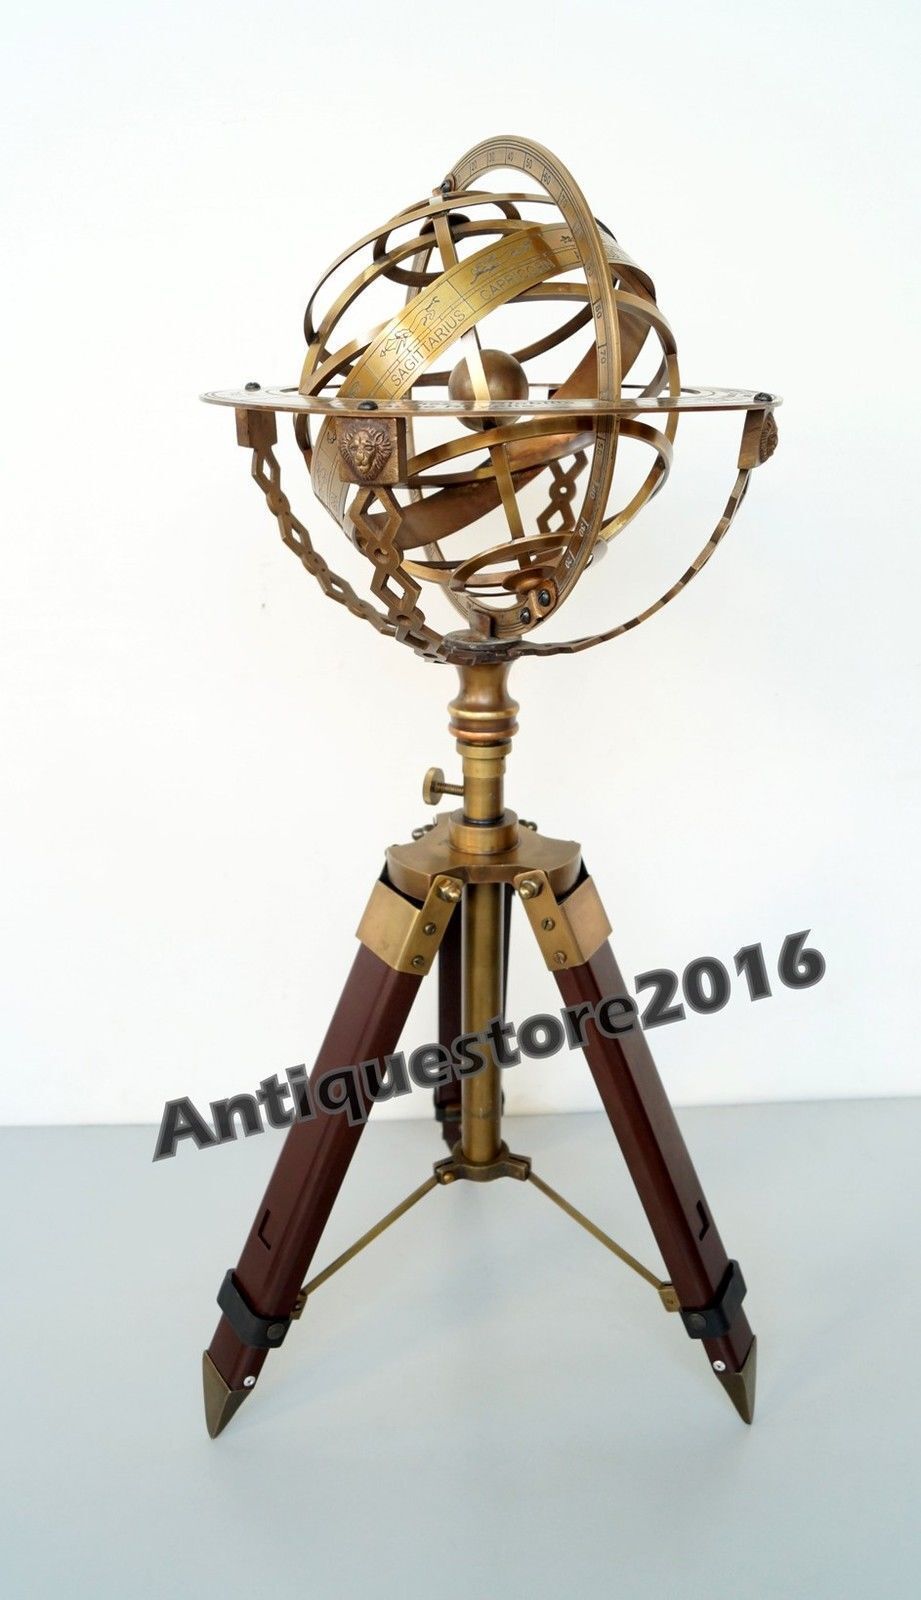 Vintage Armillary Large Engraved World Nautical Sphere Globes With Tripod Stand